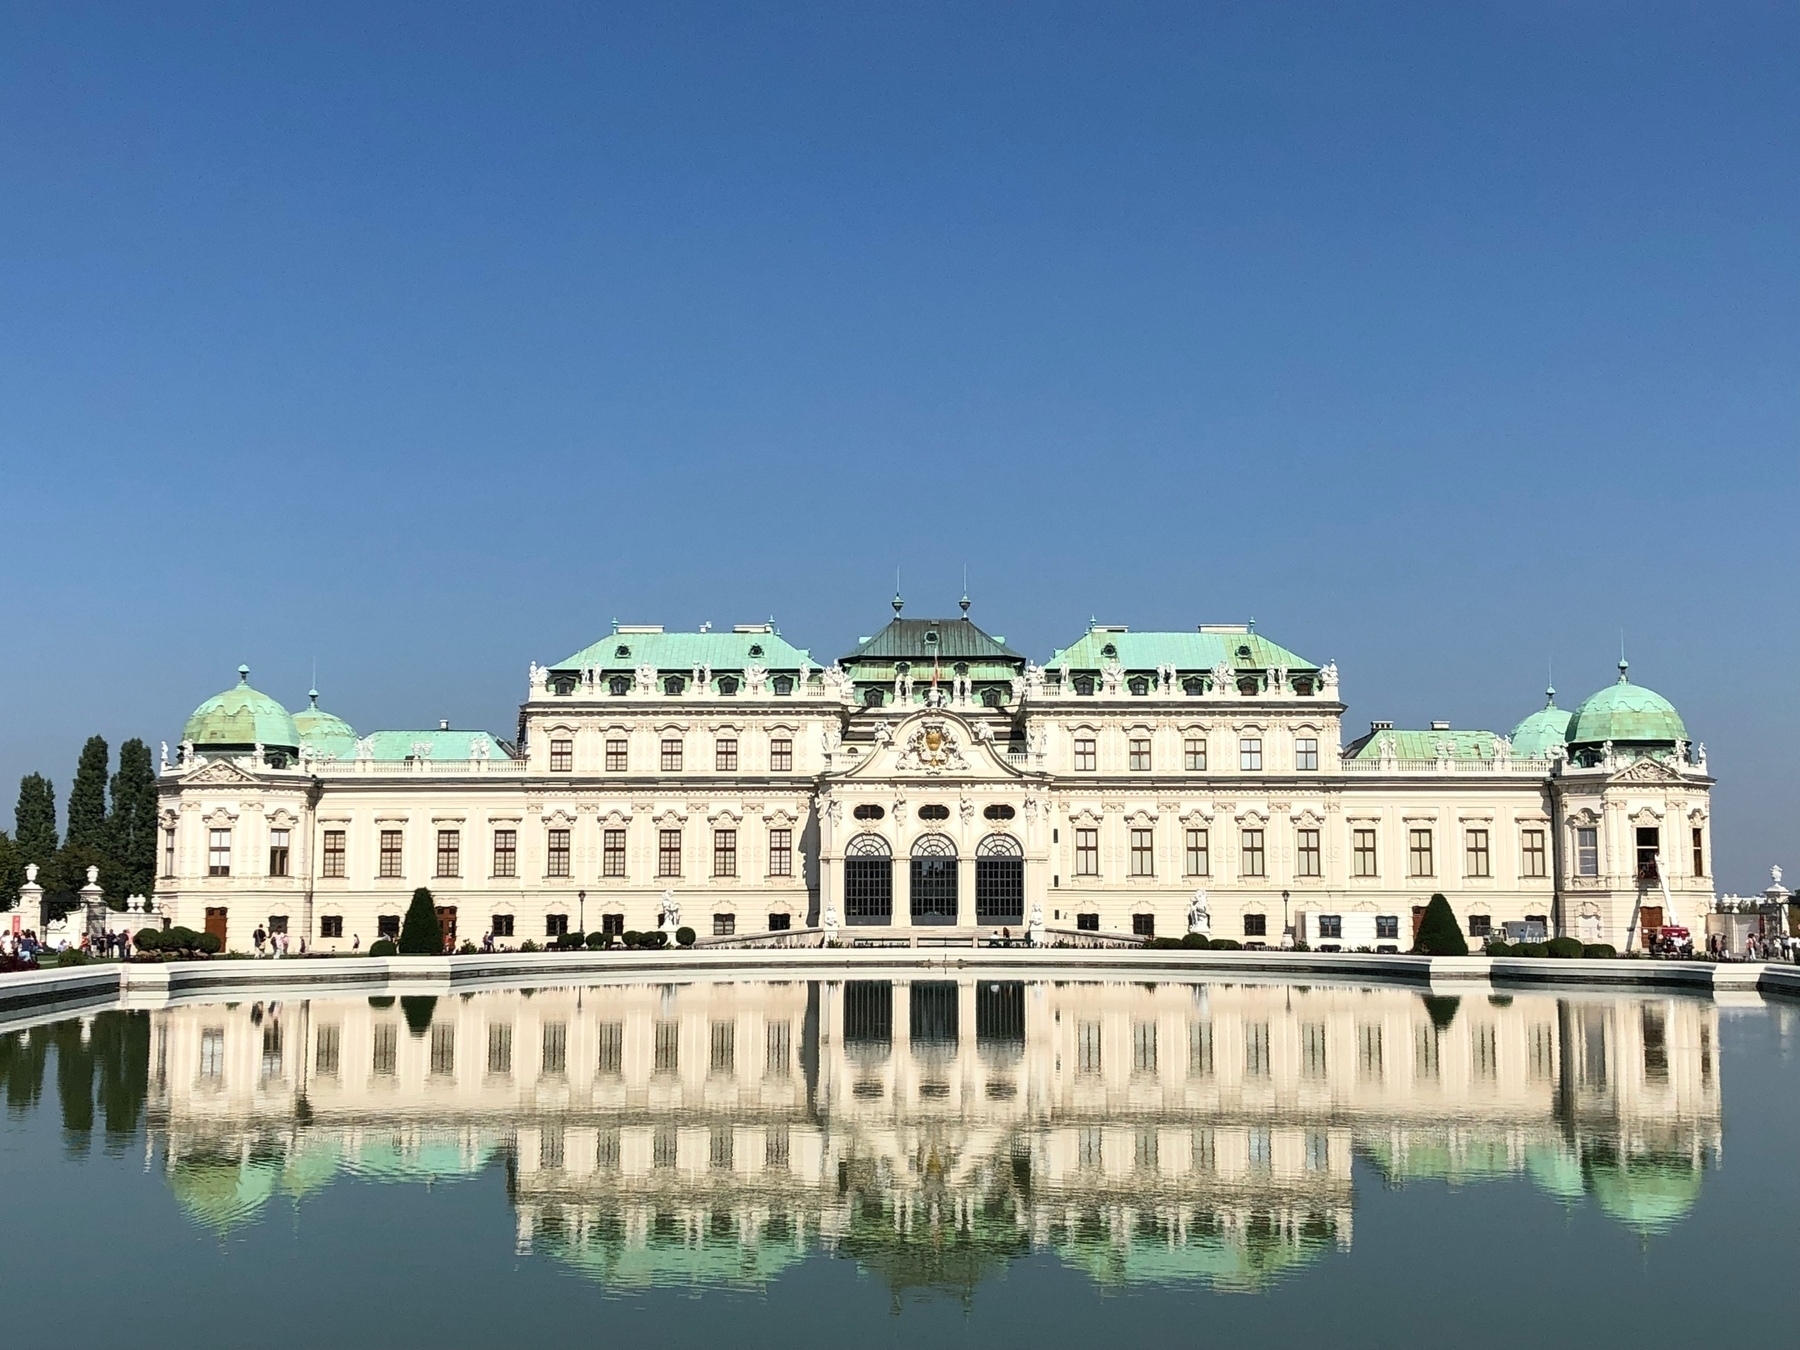 A large white baroque palace with green roof, two main levels and a smaller third and fourth level in the middle third. The palace is clearly reflected in the very large pond in front.